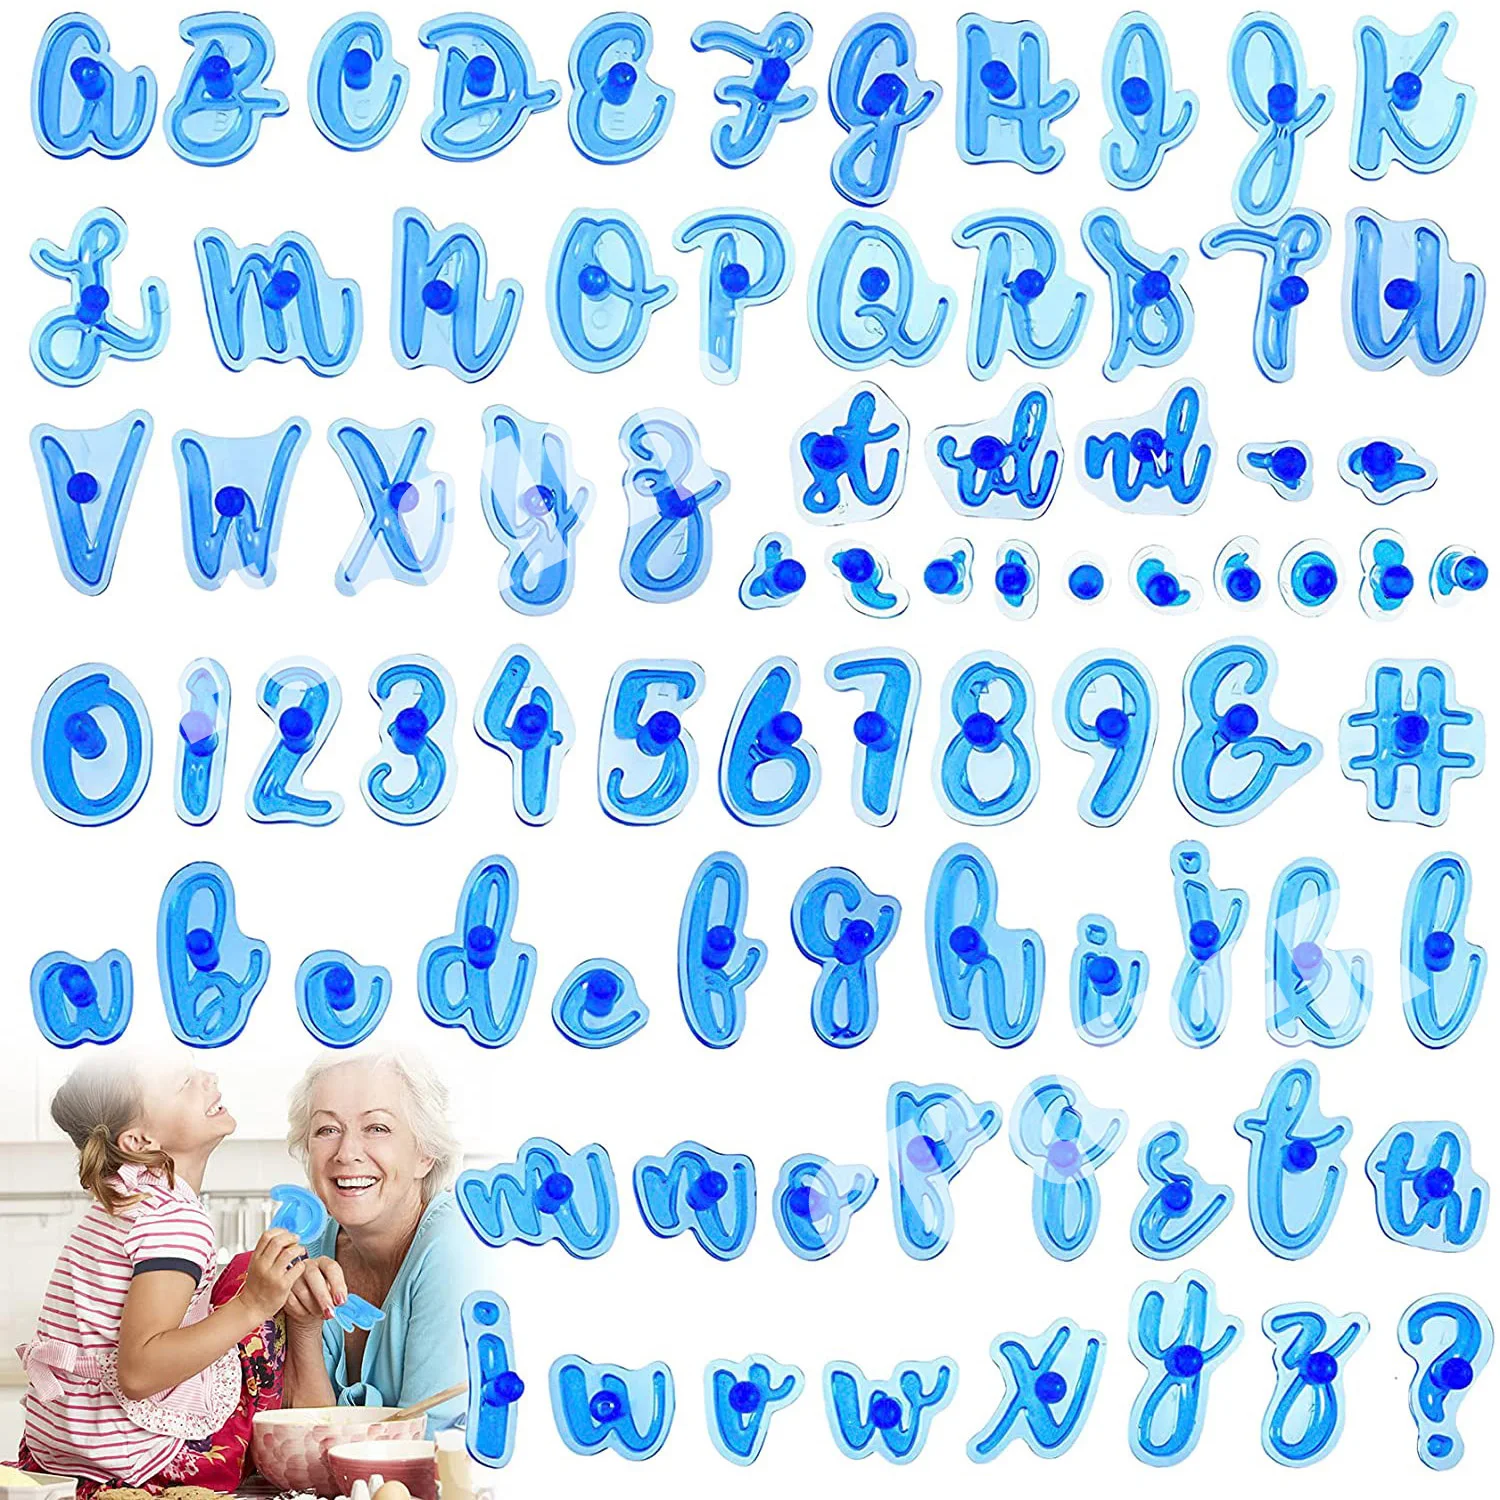 

Alphabet Number Cake Stamp Fun Upper Lower Case Set Special Character Cookie Sugar Fondant Baking Mold Cake Decoration Tool